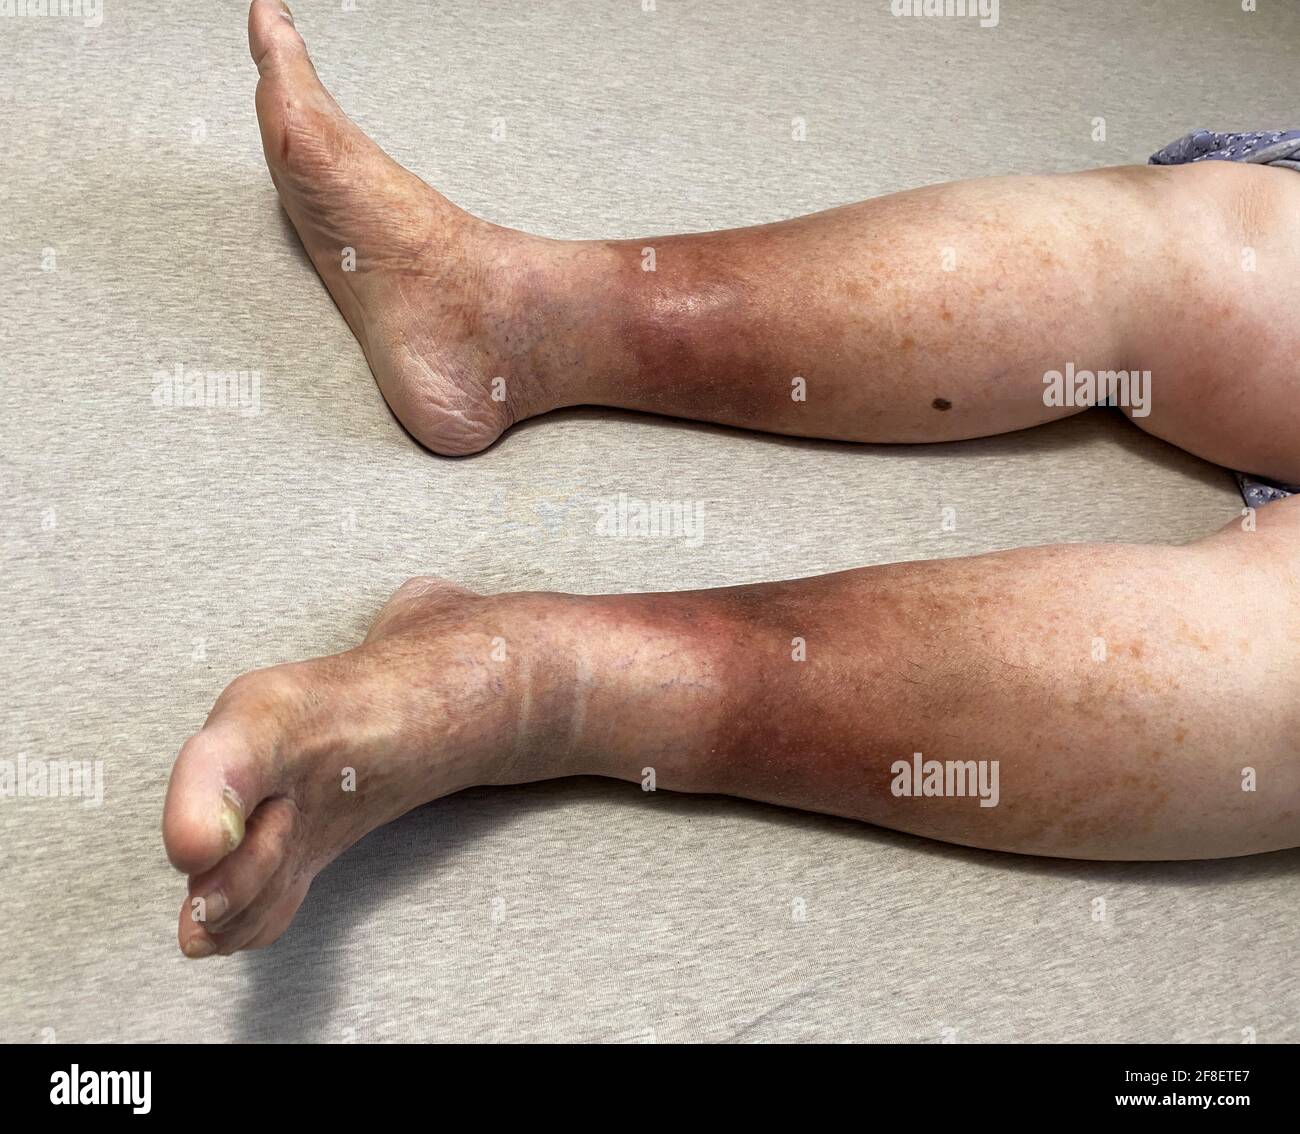 A woman's legs are shown, she is suffering from Chronic Venous Insufficiency with mild cellulitis in her legs. In bed as she rest to relieve heaviness Stock Photo